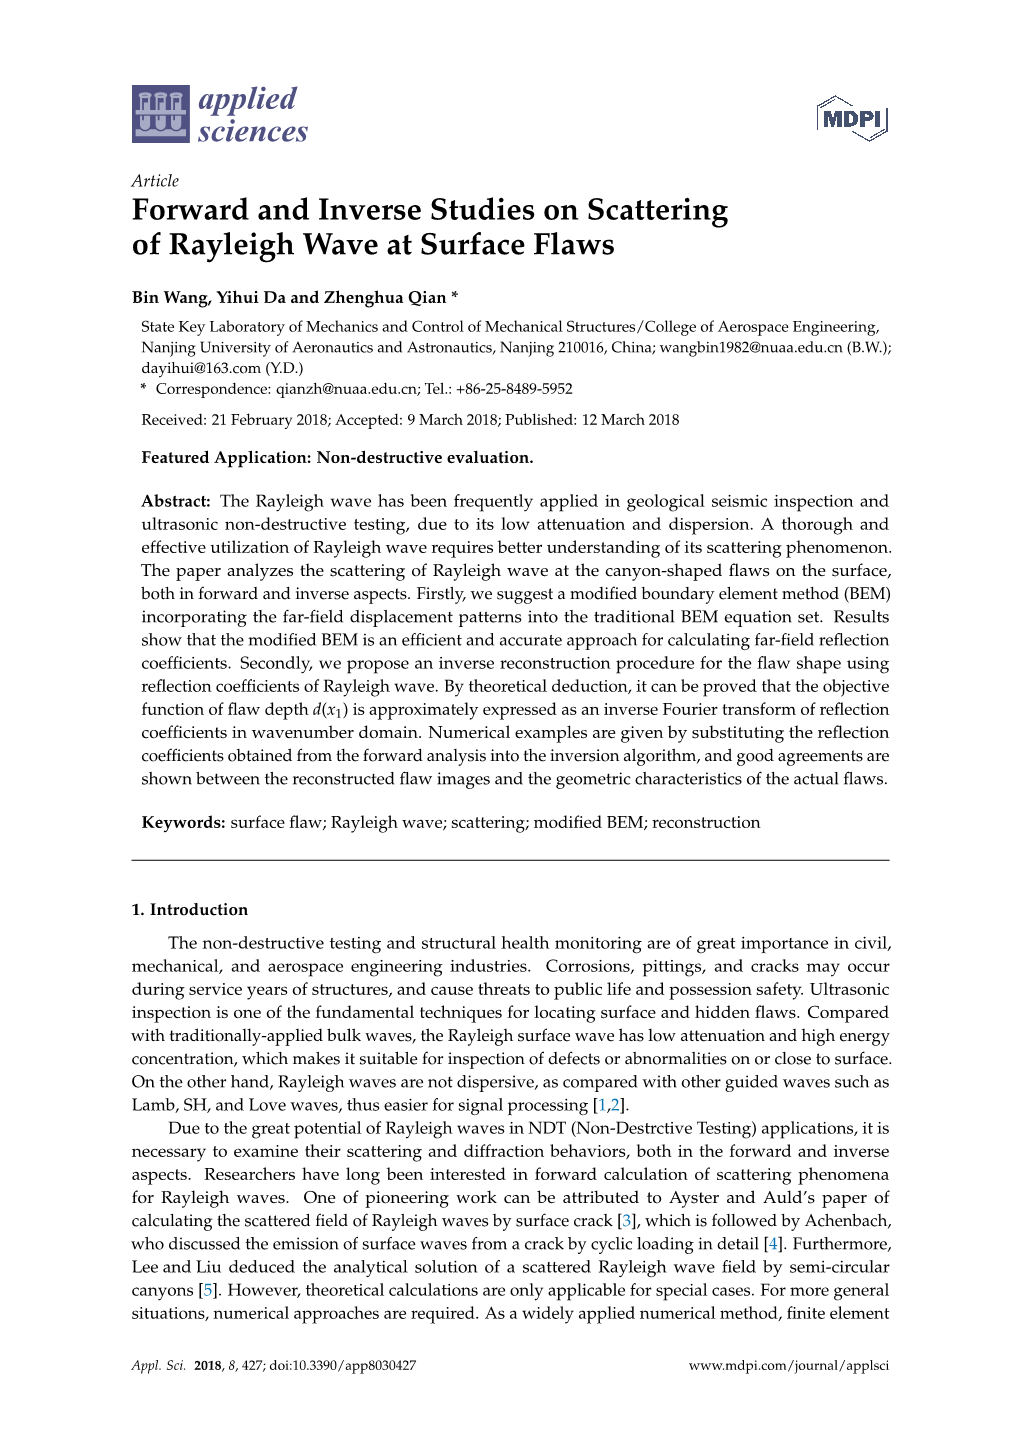 Forward and Inverse Studies on Scattering of Rayleigh Wave at Surface Flaws